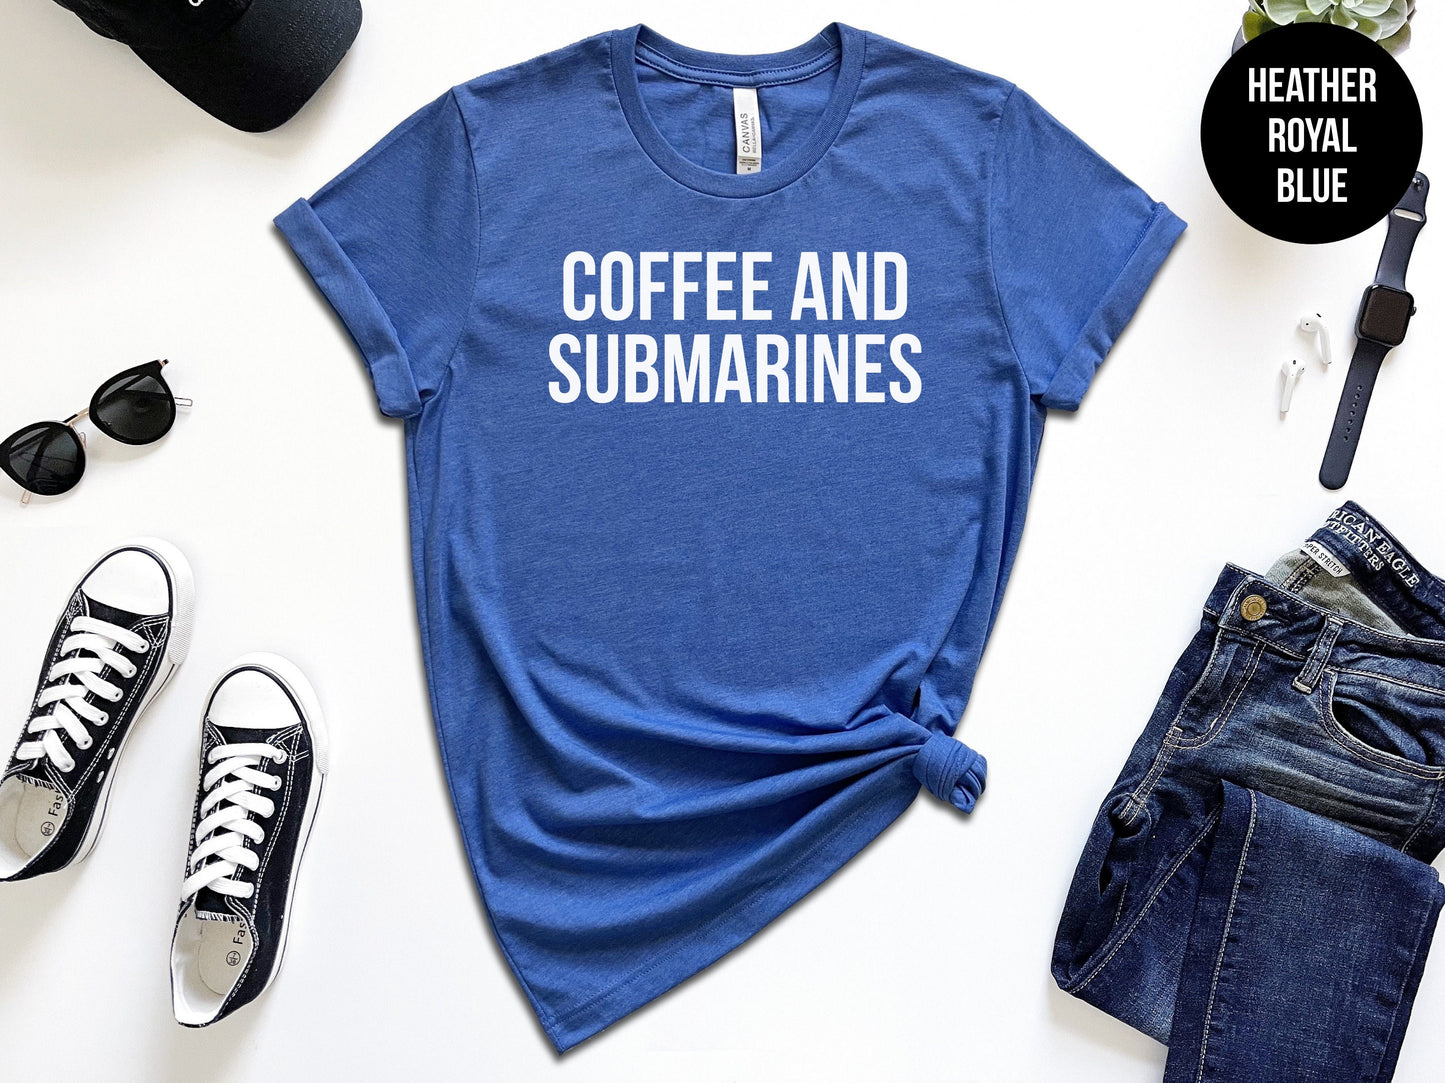 Coffee and Submarines